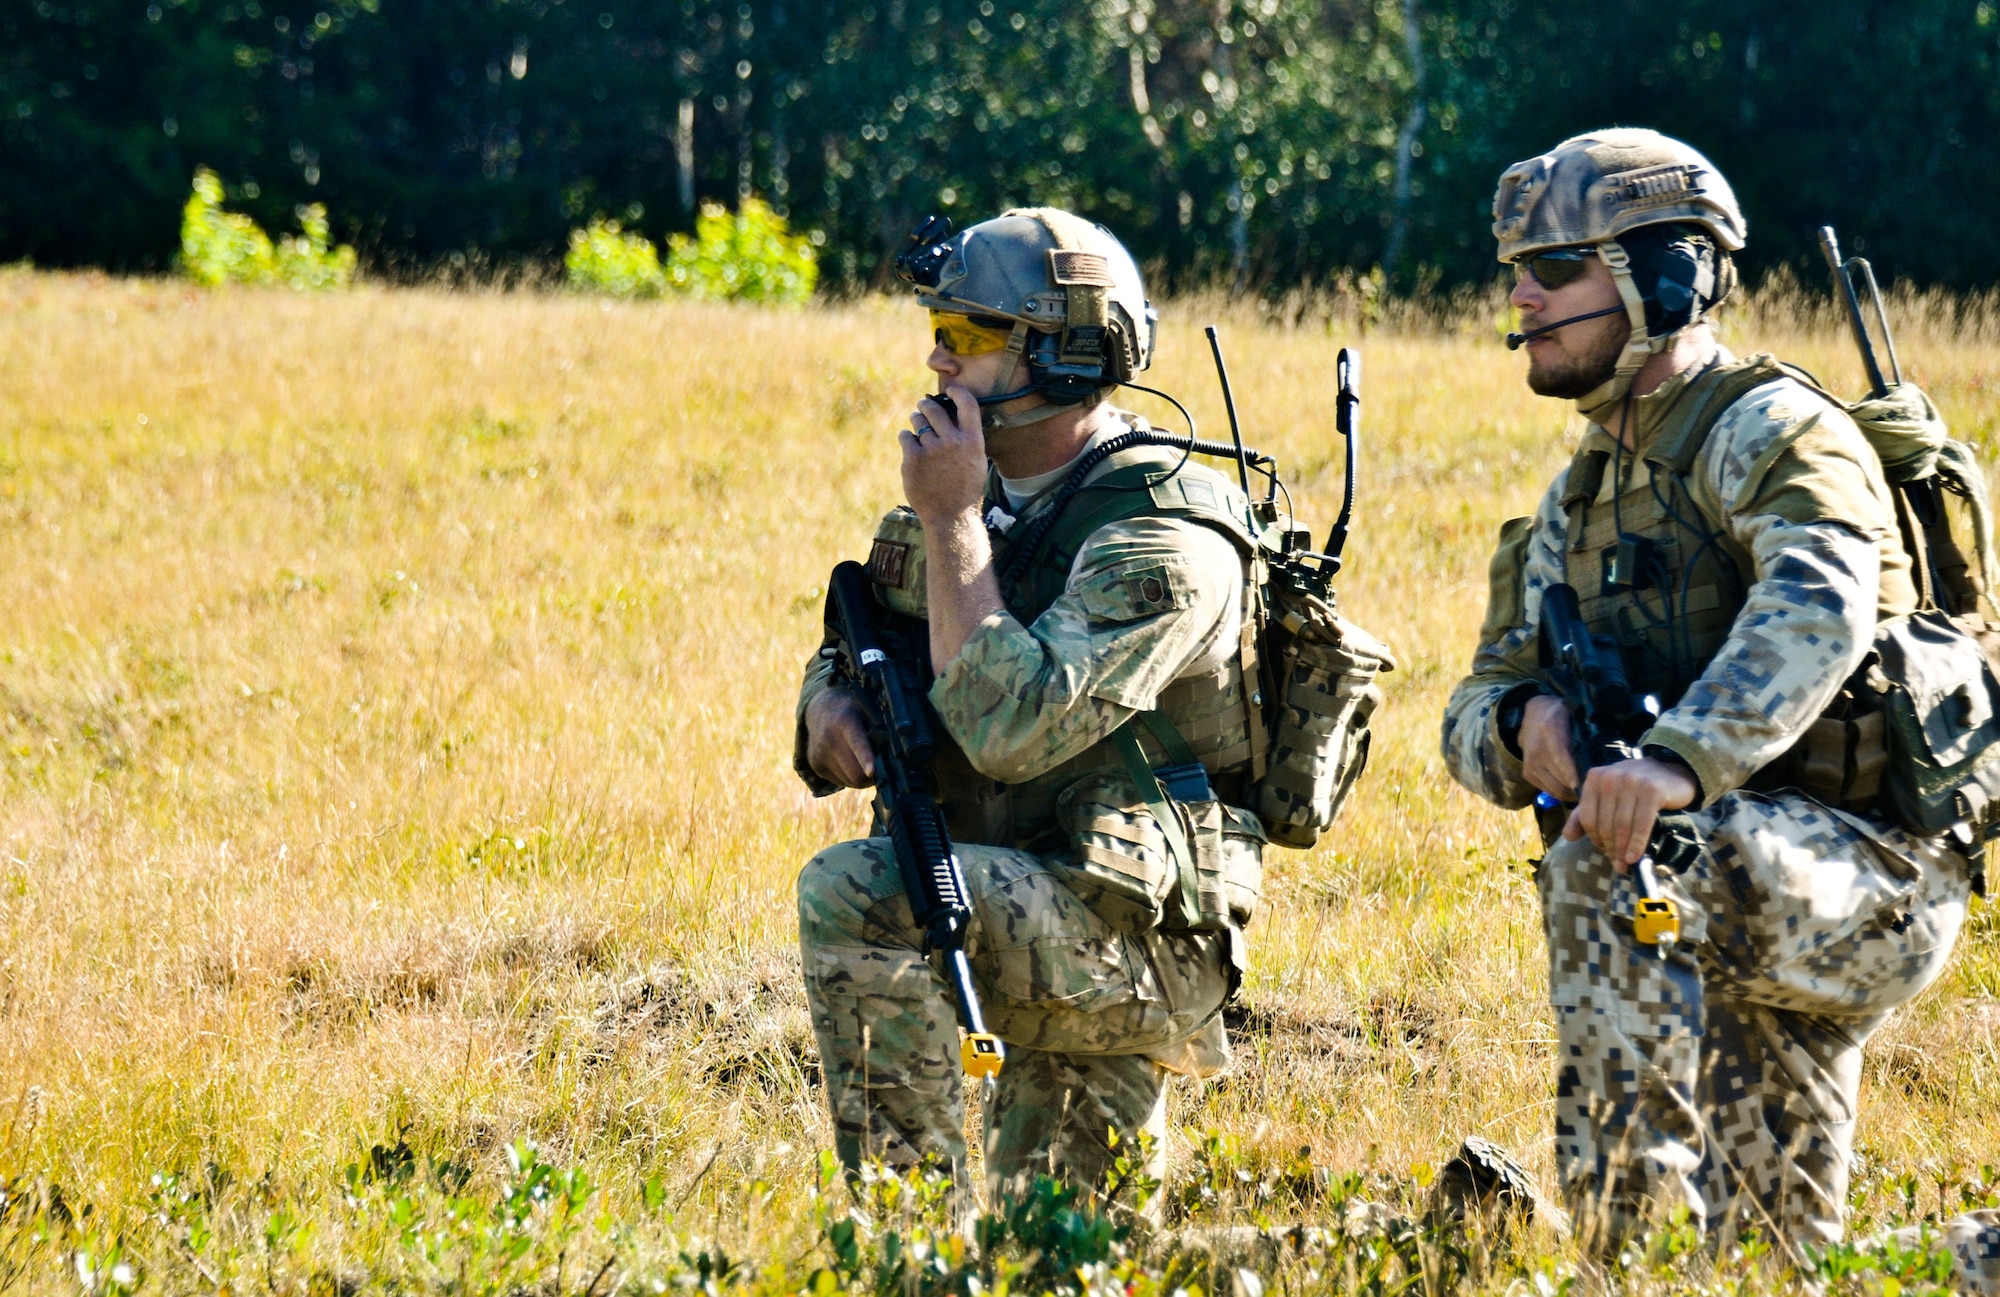 Master Sgt. John M. Oliver (left), Tactical Air Control Party specialist with the 169th Air Support Operations Squadron, and Latvian 1st Sgt. Modris Circenis, TACP with the Latvian National Armed Forces, communicate with a team flanking an enemy position during a reconnaissance mission at Operation Northern Strike in Grayling Air Gunnery Range, Grayling, Mich., Aug. 14, 2014.  (U.S. Air National Guard photo by Staff Sgt. Lealan Buehrer)